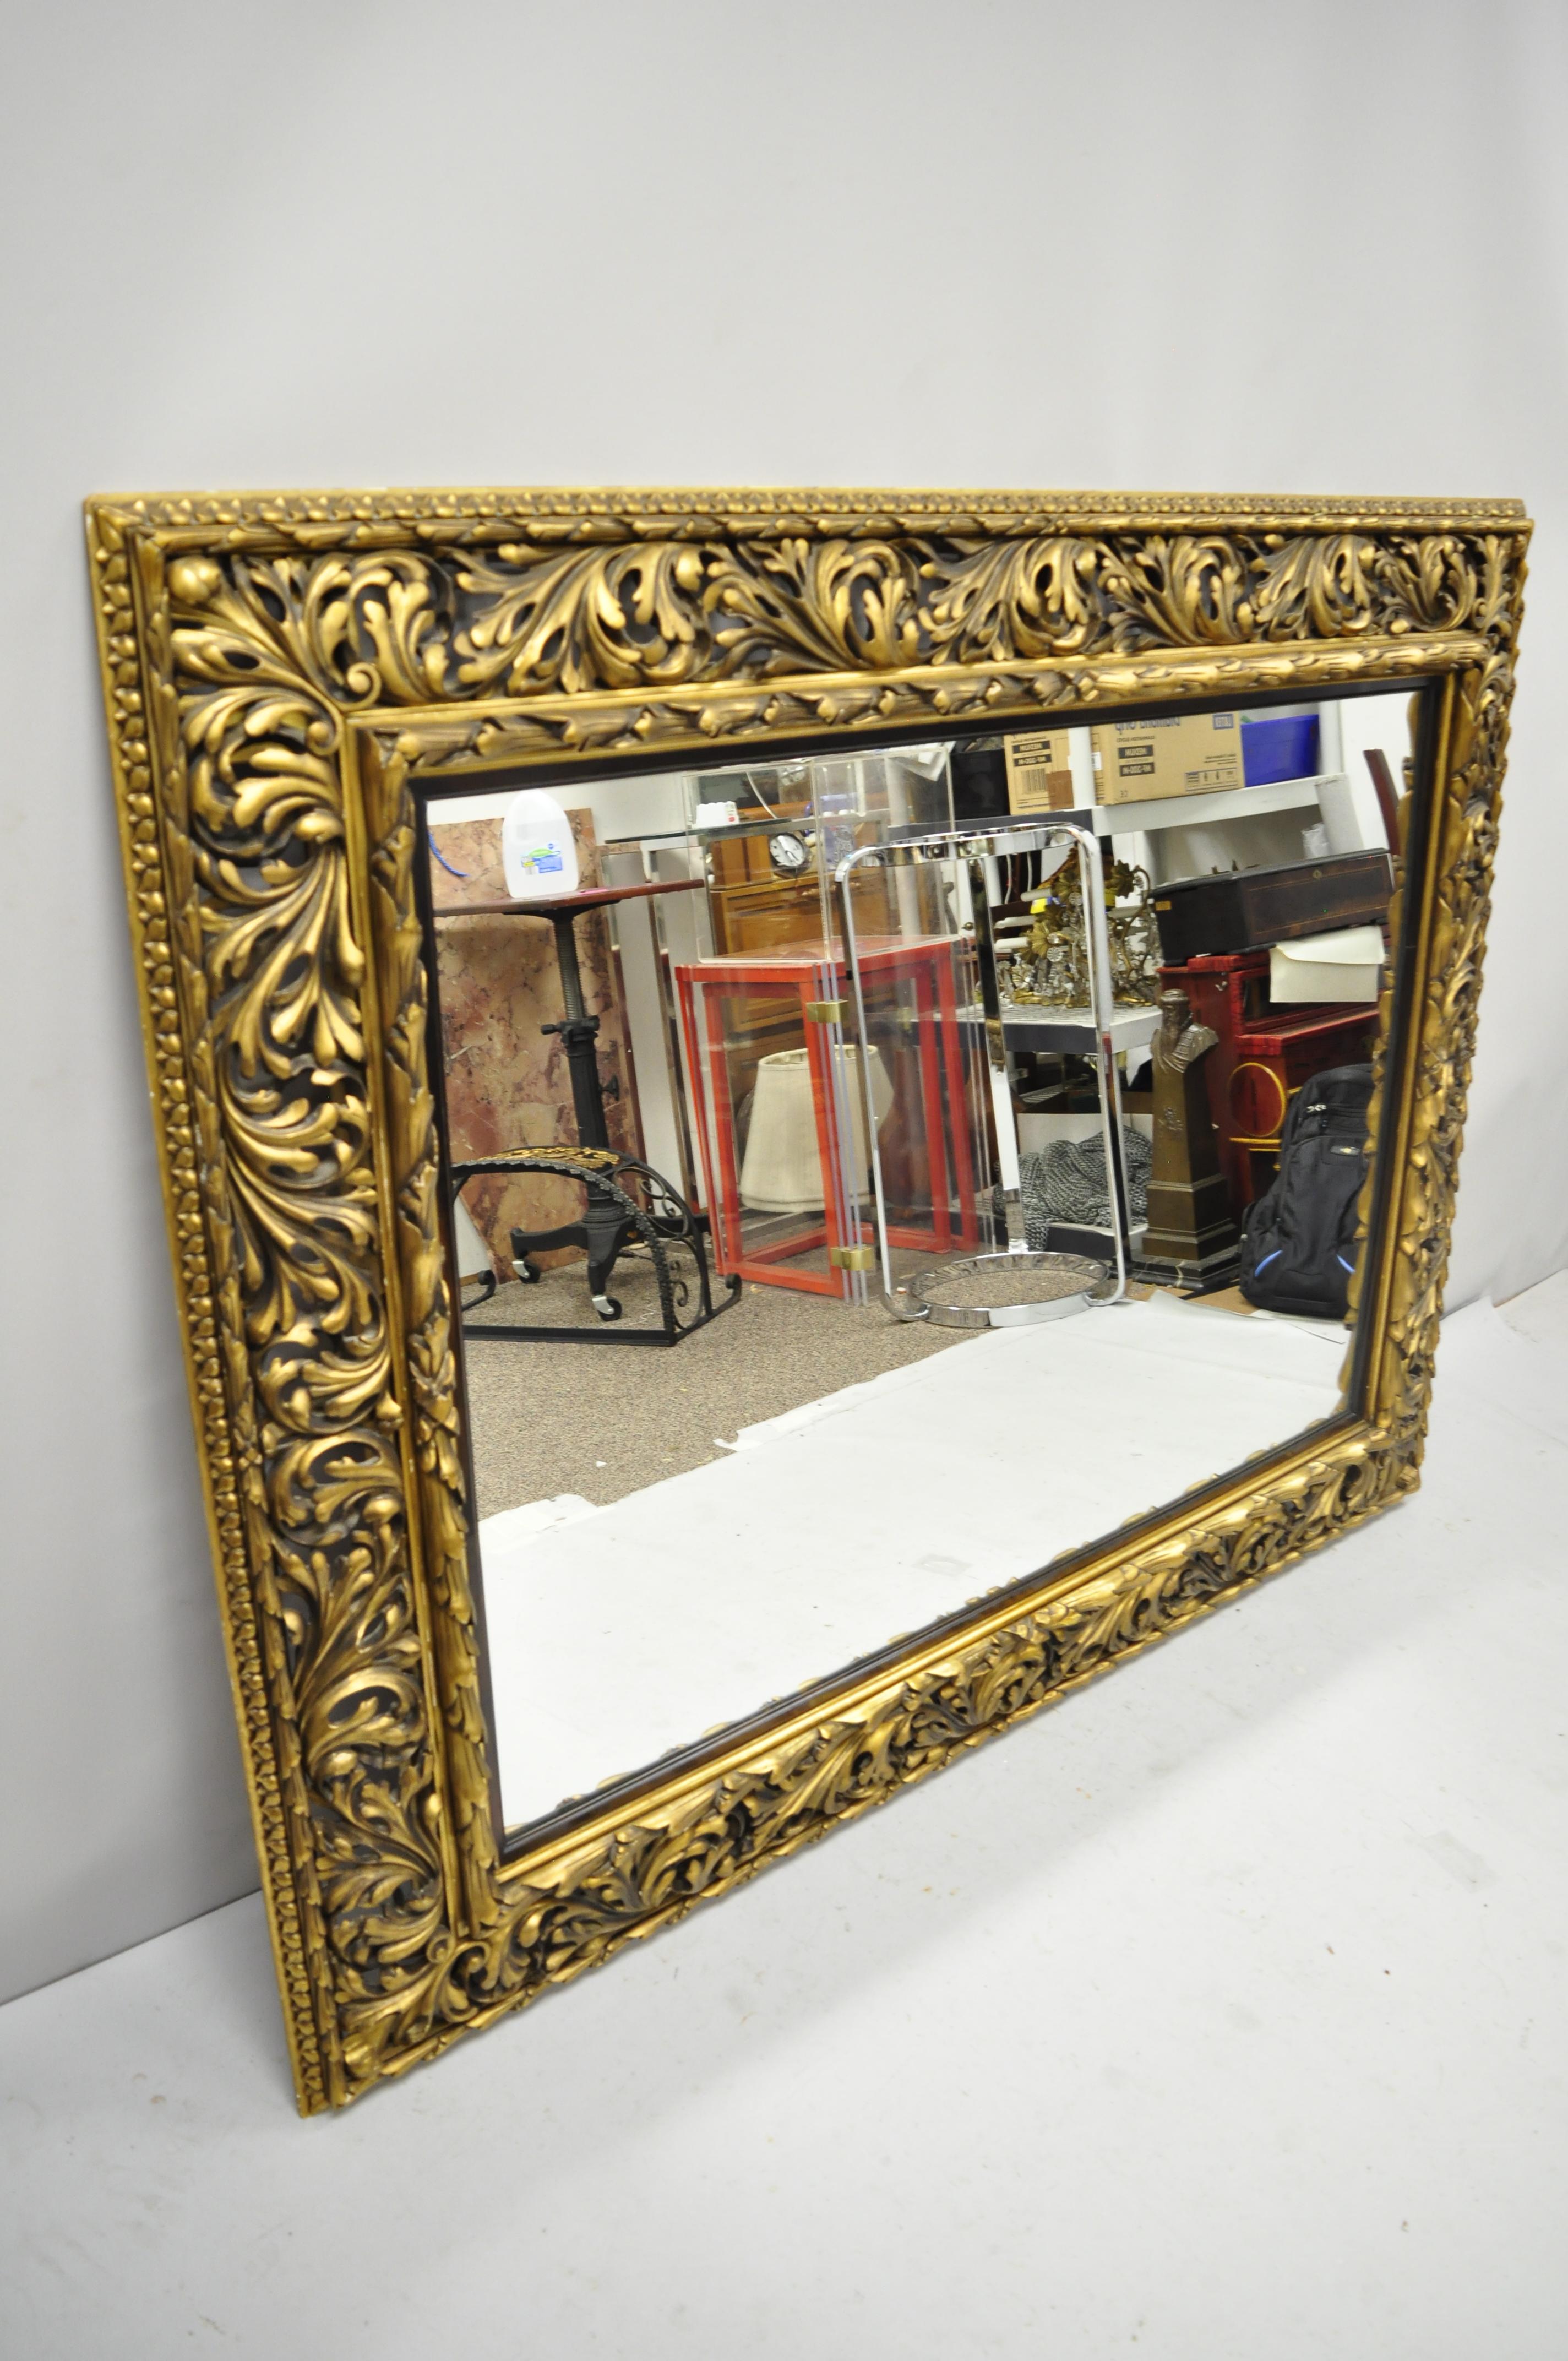 Antique French Baroque Rococo style pierce carved wood large gold mirror. Item features remarkable pierce carved wood frame, burnished gold finish, ornate scrollwork, circa early 20th century. Measurements: 50.75